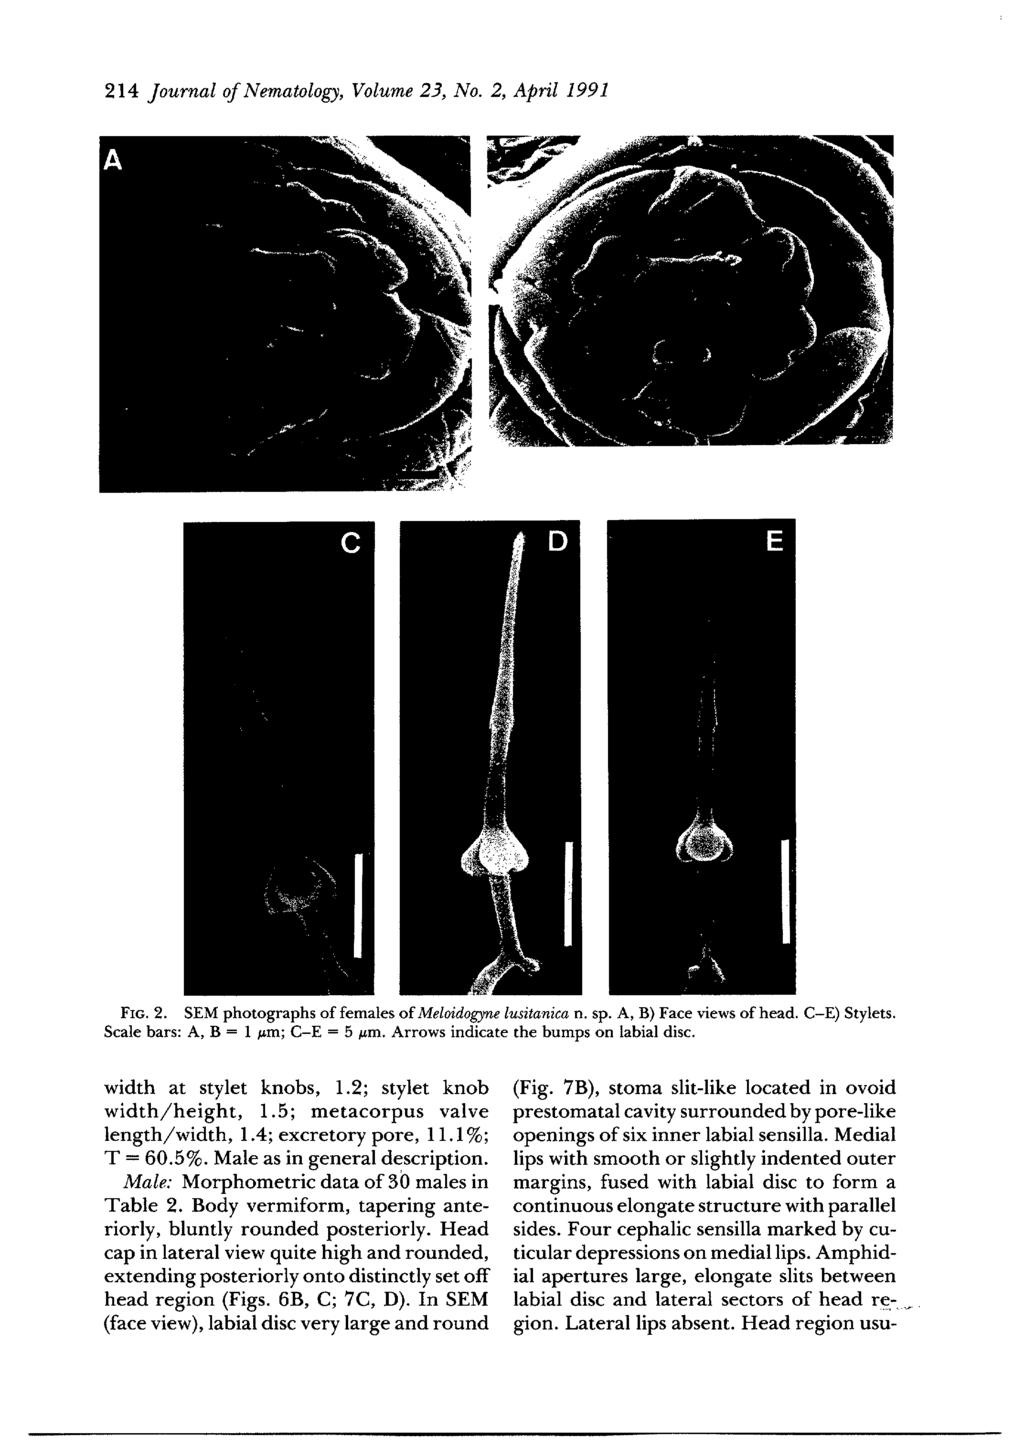 214 Journal of Nematology, Volume 23, No. 2, April 1991 D E ) FIG. 2. SEM photographs of females of Meloidogyne lusitanica n. sp. A, B) Face views of head. C-E) Stylets.